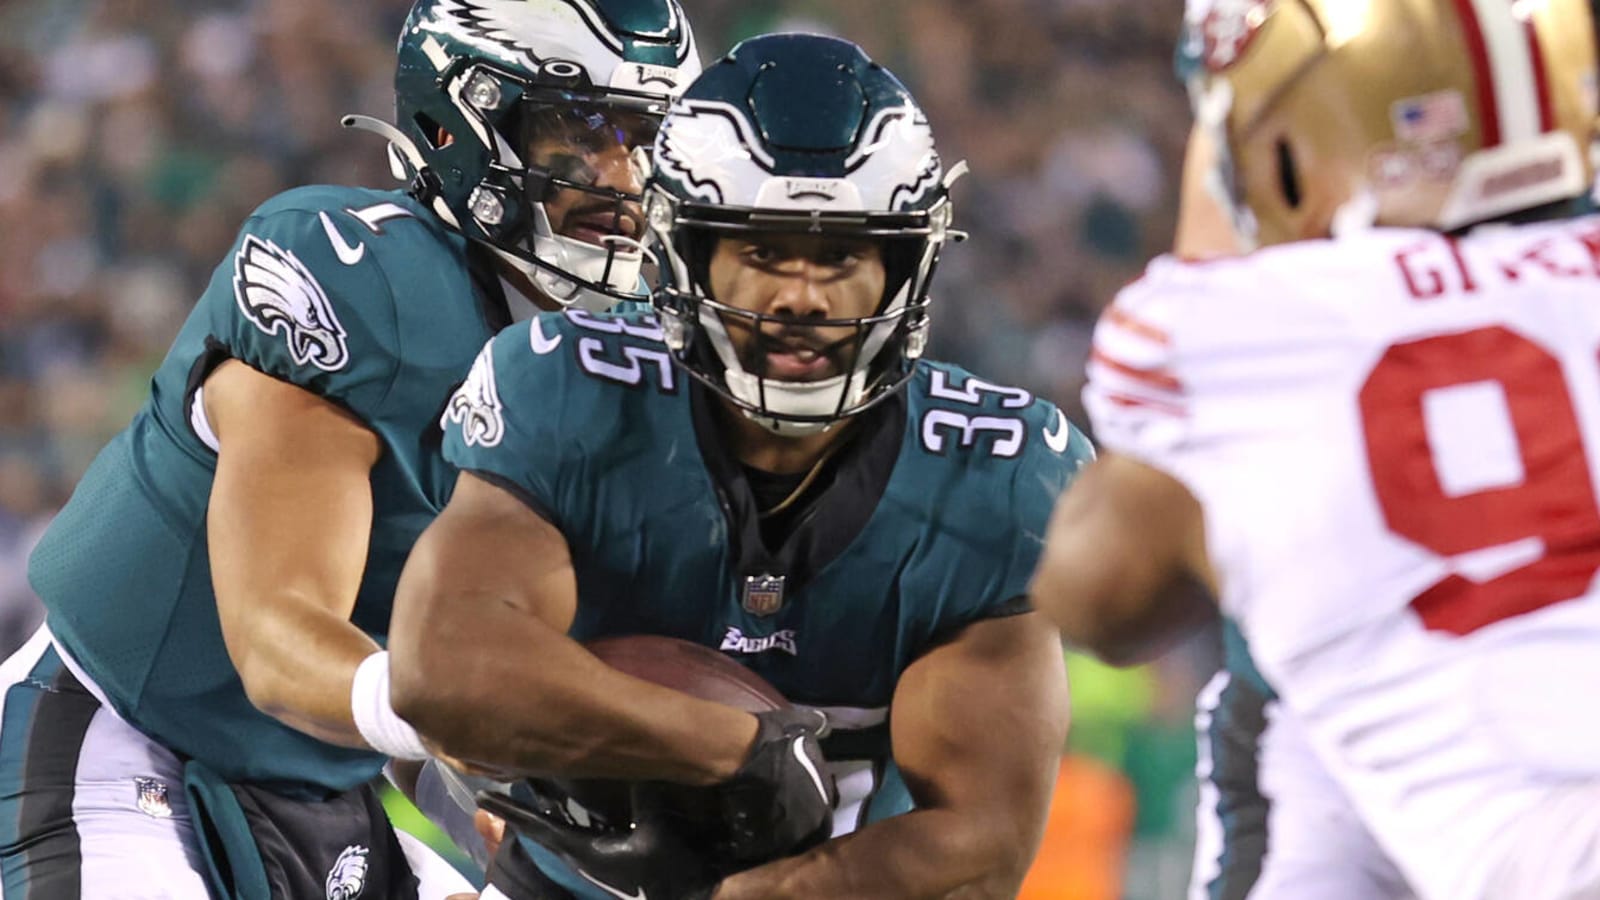 Three Eagles likely competing for fourth RB spot